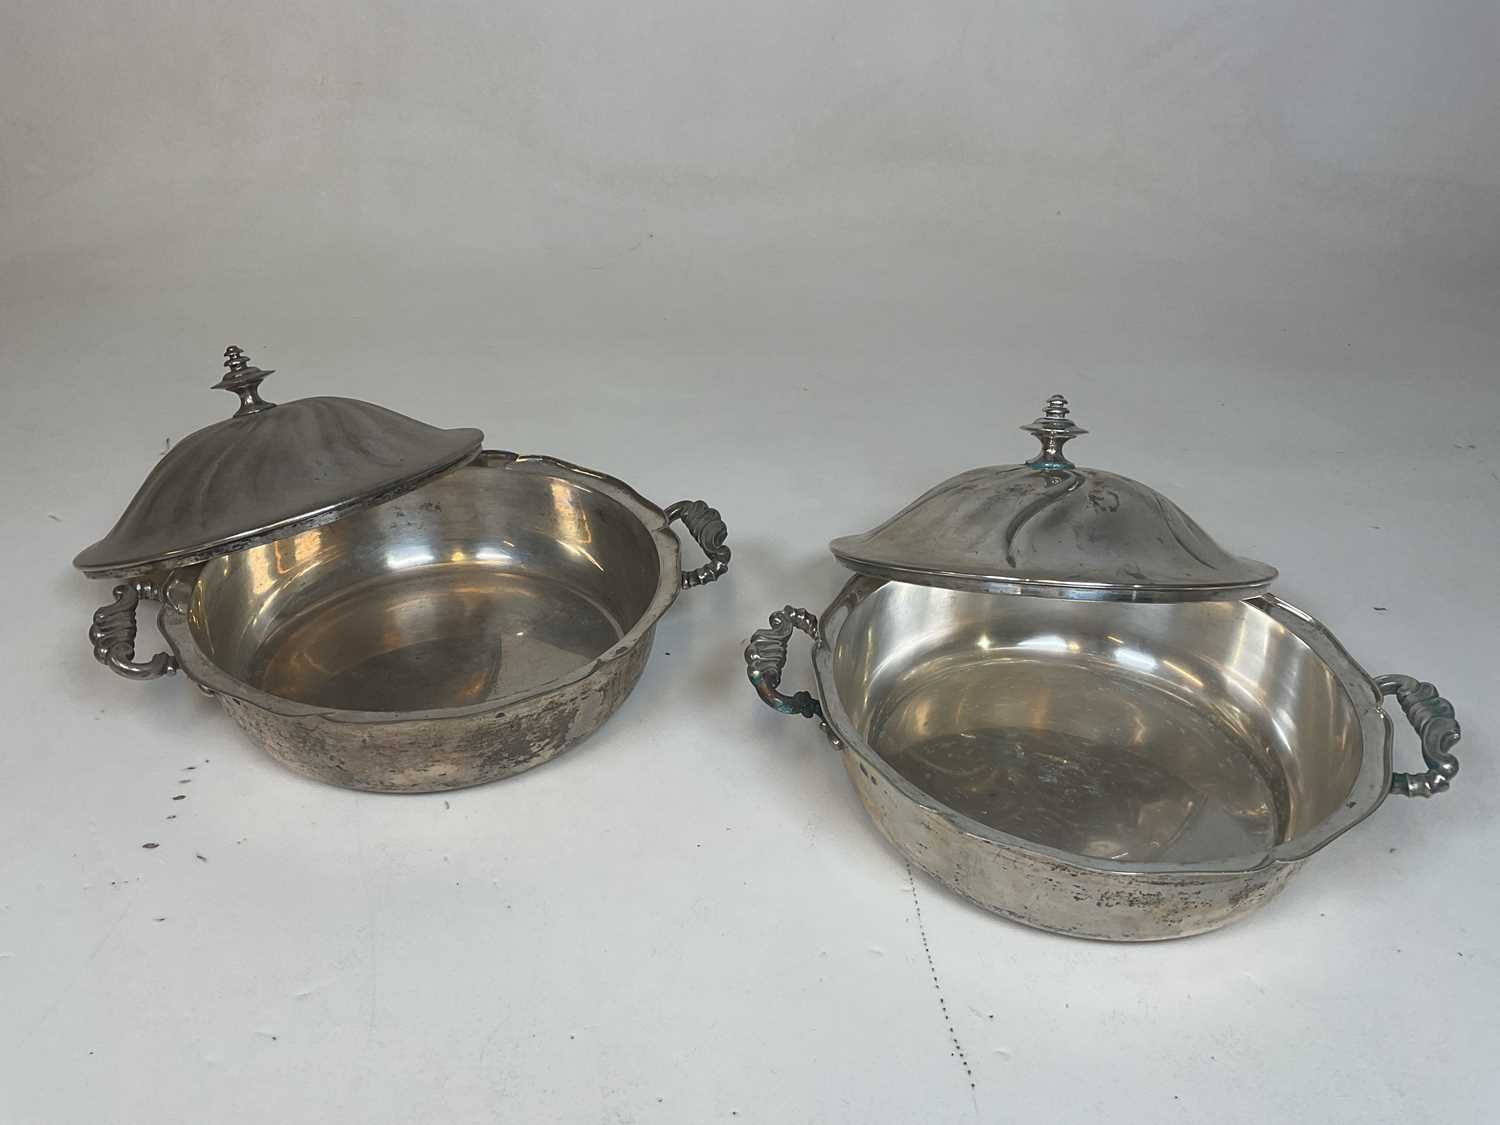 J. C. KLINKOSCH; a pair of late 19th century Austro-Hungarian silver tureens and covers of - Image 3 of 9